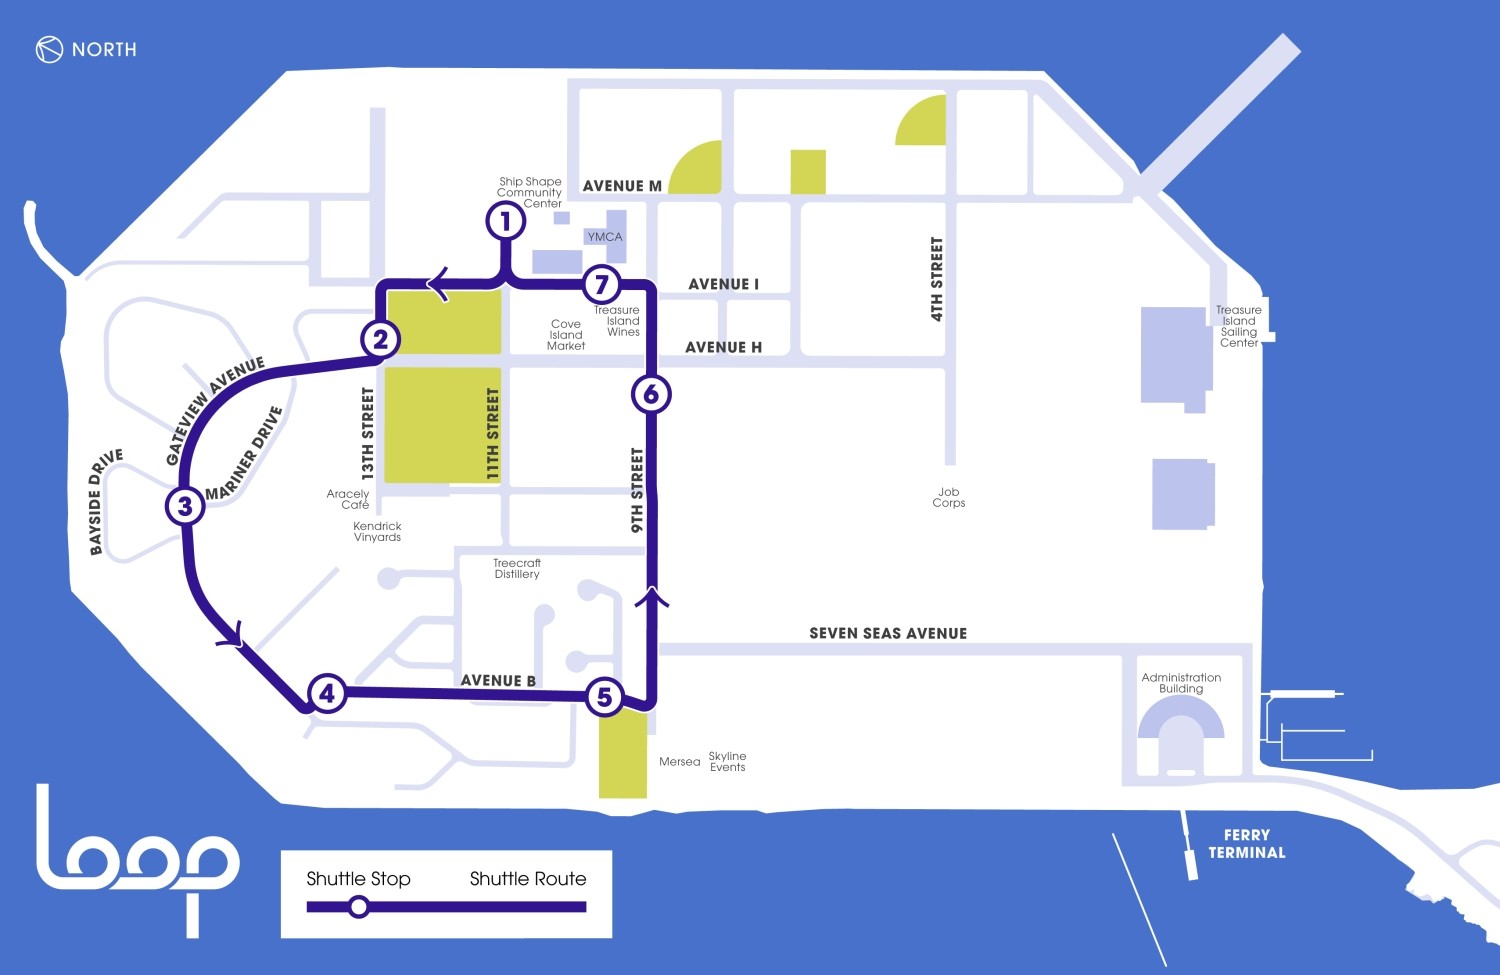 A map of Treasure Island, with north pointing up and to the left. The Loop shuttle route is shown in dark blue with stops at the following locations: (1) Ship Shape Community Center, (2) 13th Street at Avenue H, (3) Gateview Avenue at Mariner Drive, (4) Avenue B near Gateview Avenue, (5) Avenue B at Chinook Court, (6) 9th Street at Avenue H, and (7) Avenue I at the YMCA.